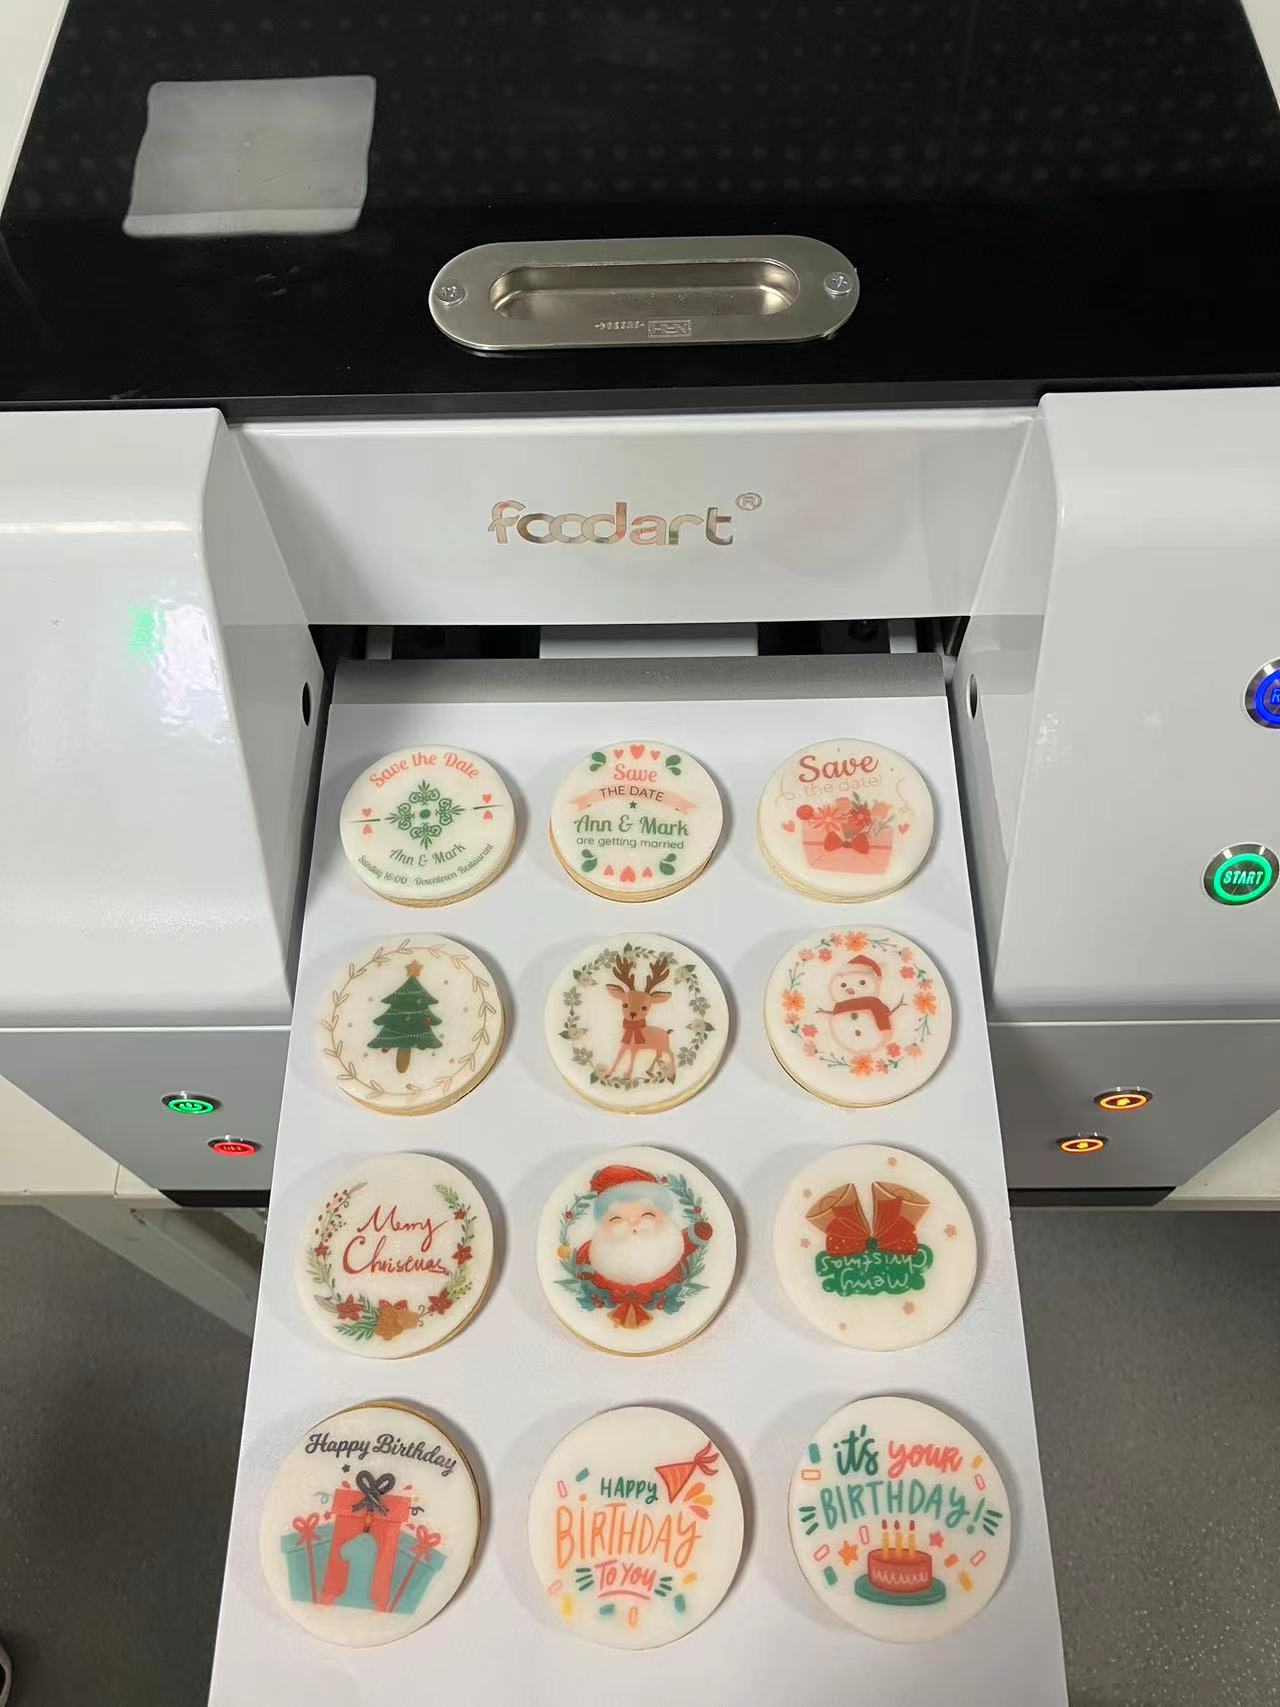 How frosting biscuits enable creative printing！